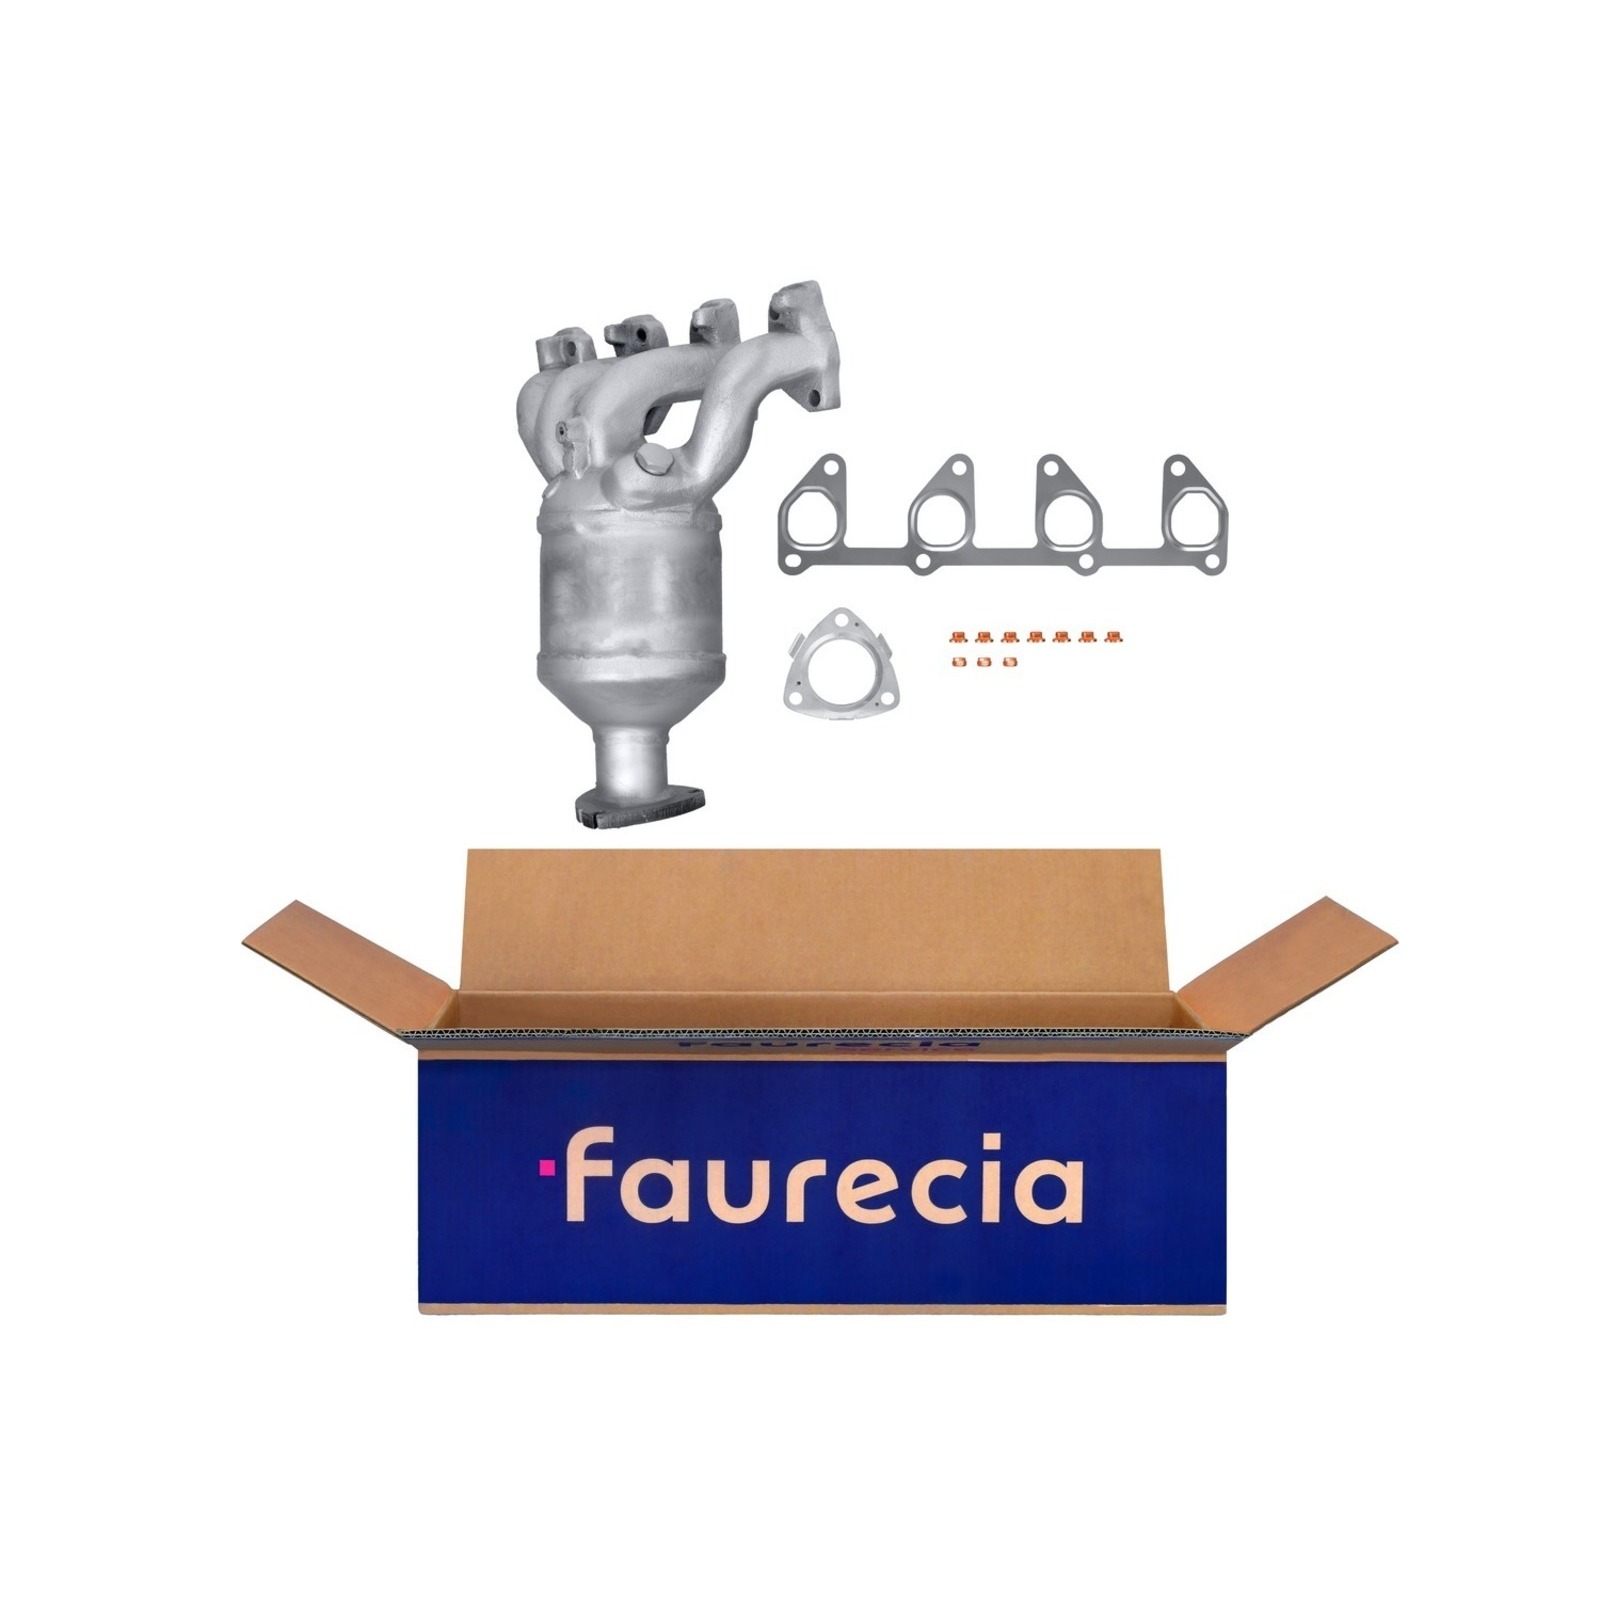 HELLA Manifold Catalytic Converter Easy2Fit – PARTNERED with Faurecia